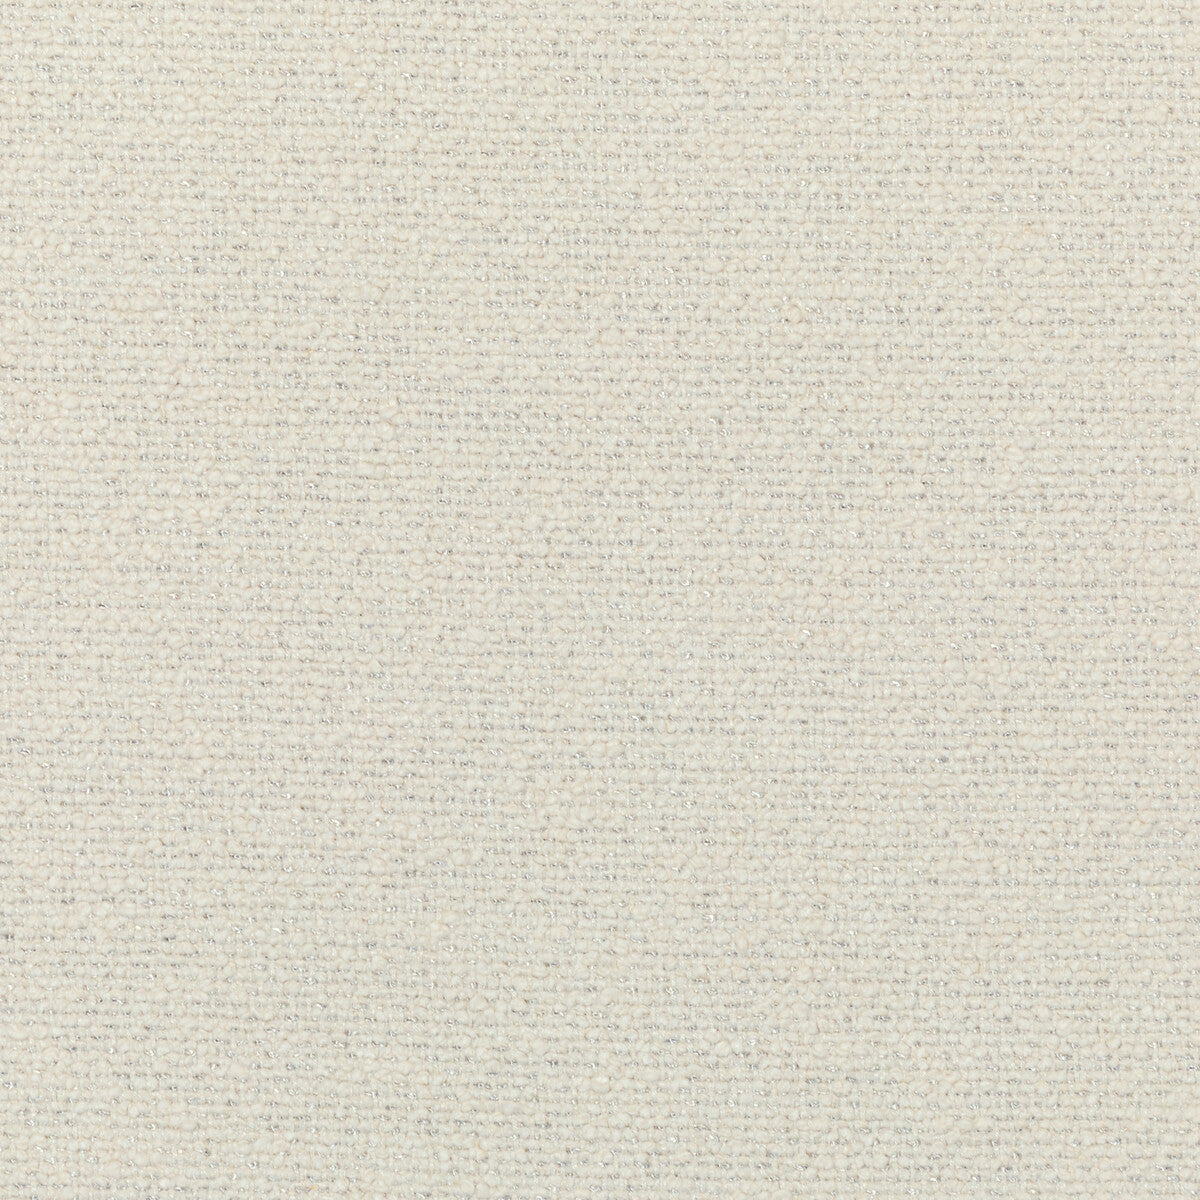 Bali Boucle fabric in ivory color - pattern 36051.1.0 - by Kravet Couture in the Luxury Textures II collection